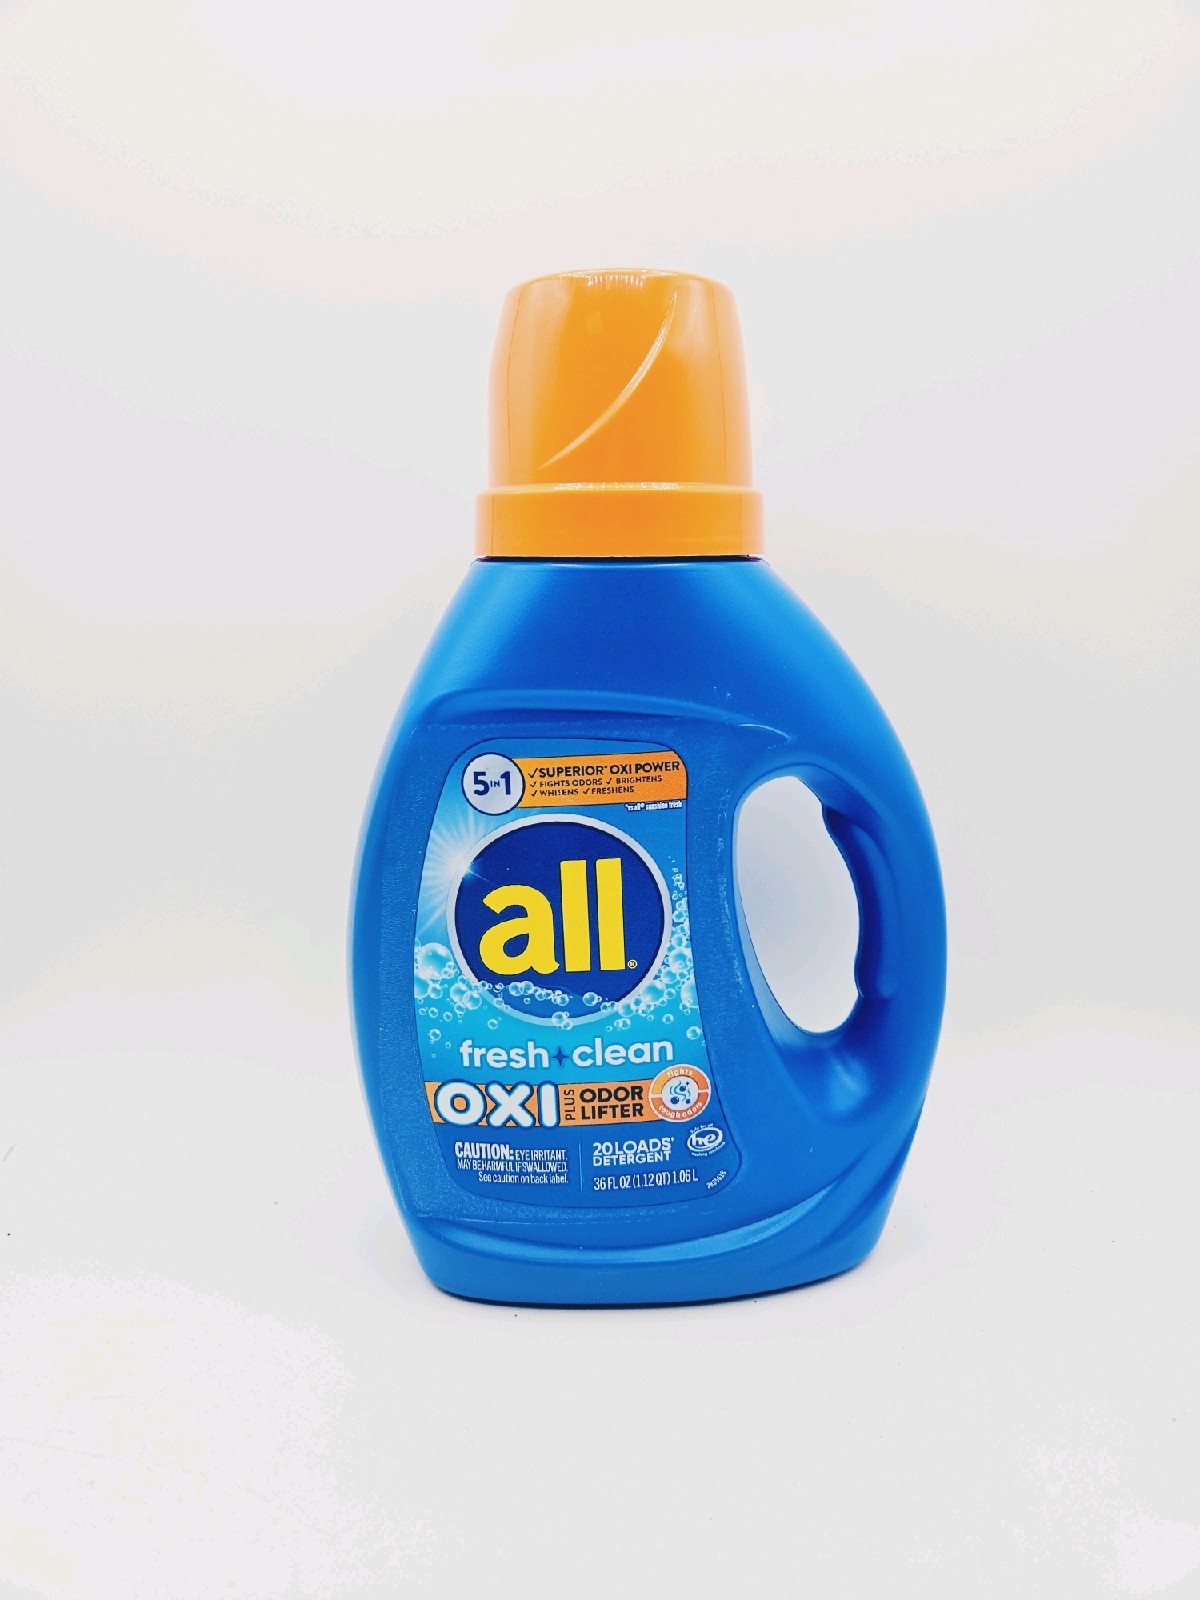 All with OXI Stain Removers Oxi Plus Odor Lifter